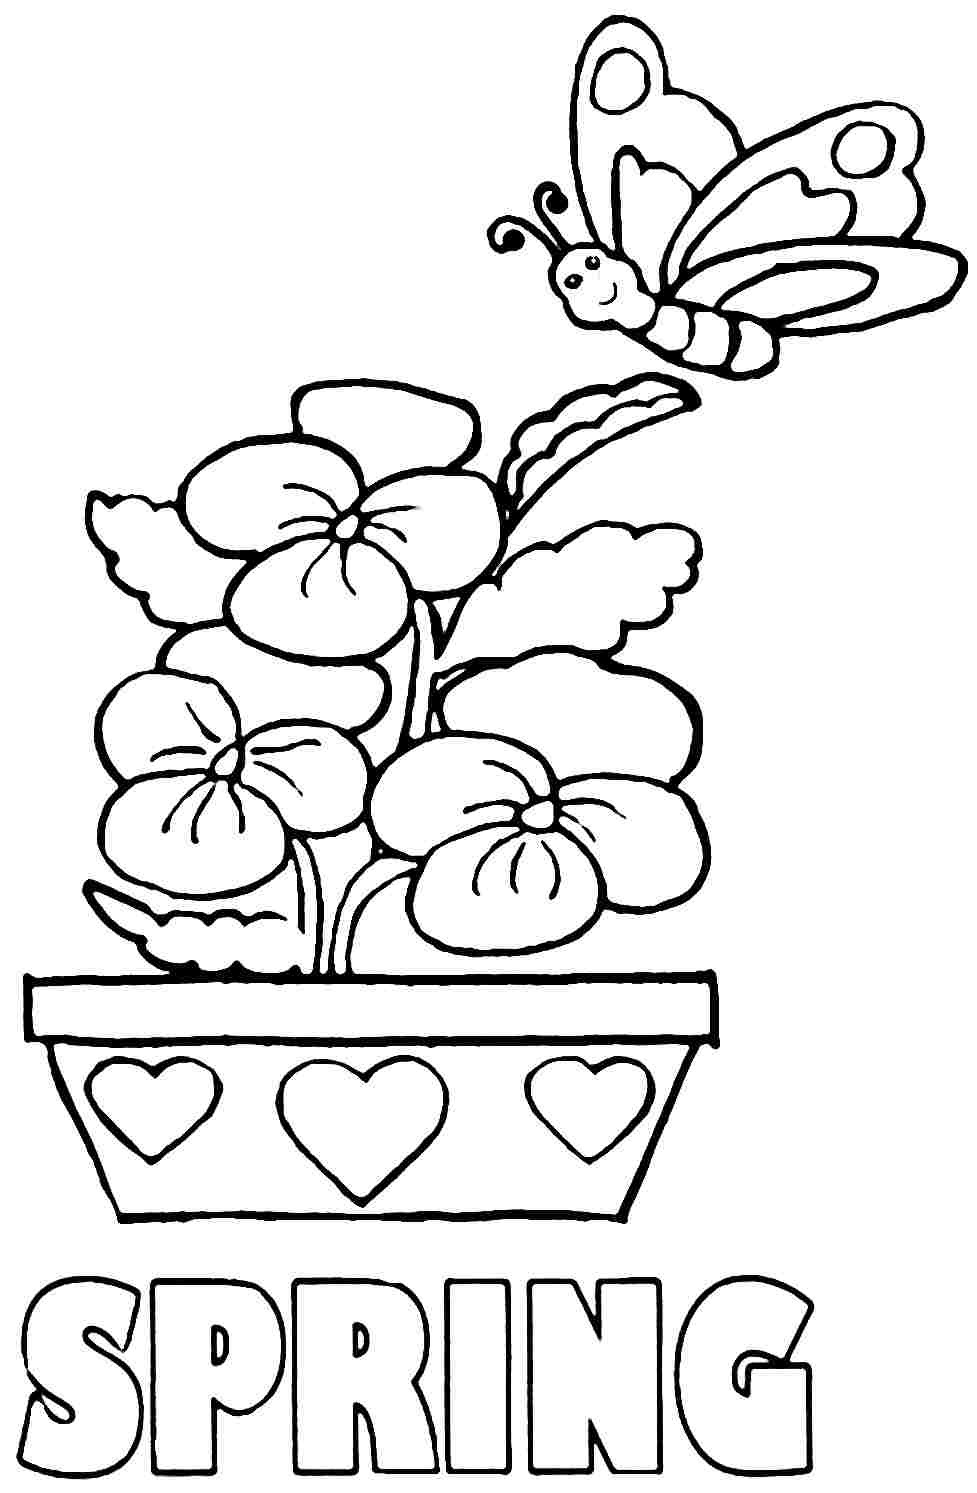 Spring Coloring Sheets For Kids
 Free Coloring Pages Spring Season Coloring Home